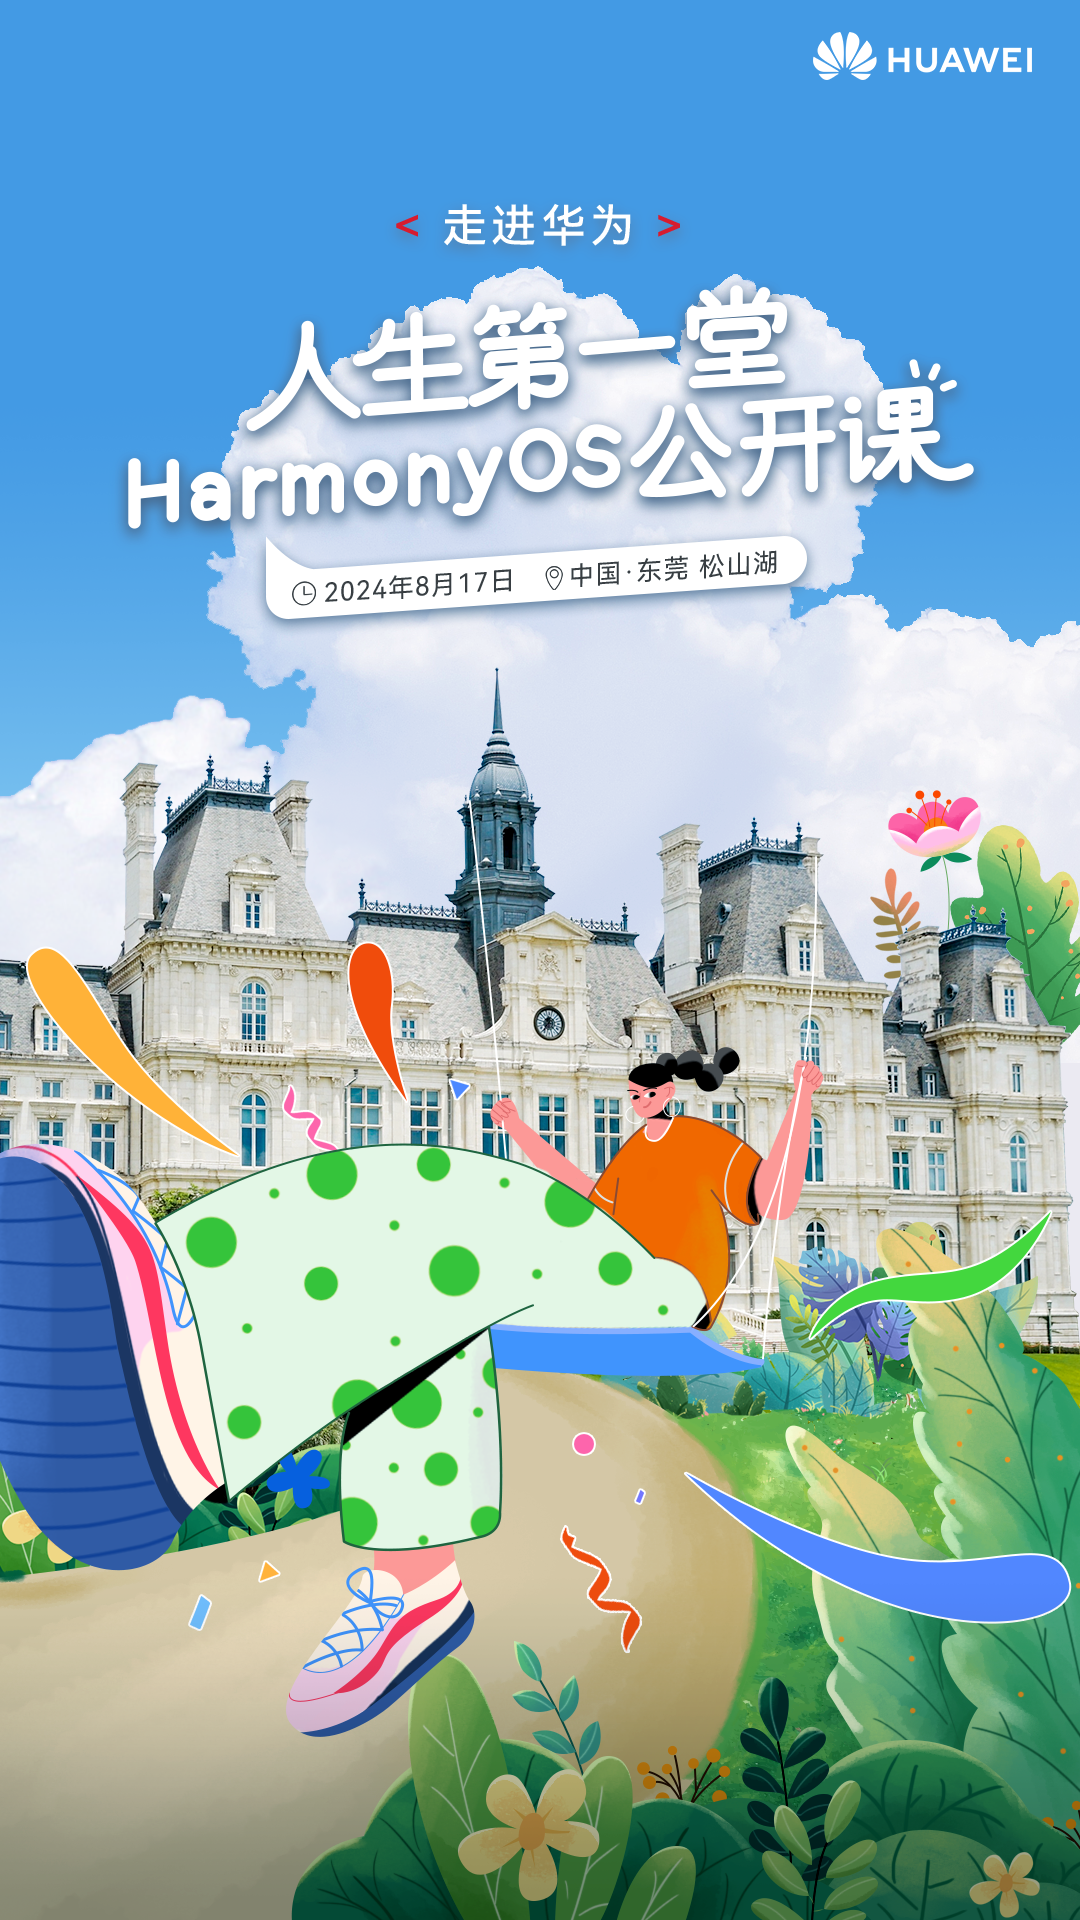 HarmonyOS open courses are open to young students for open recruitment. Talent is the key engine for the development of HarmonyOS.